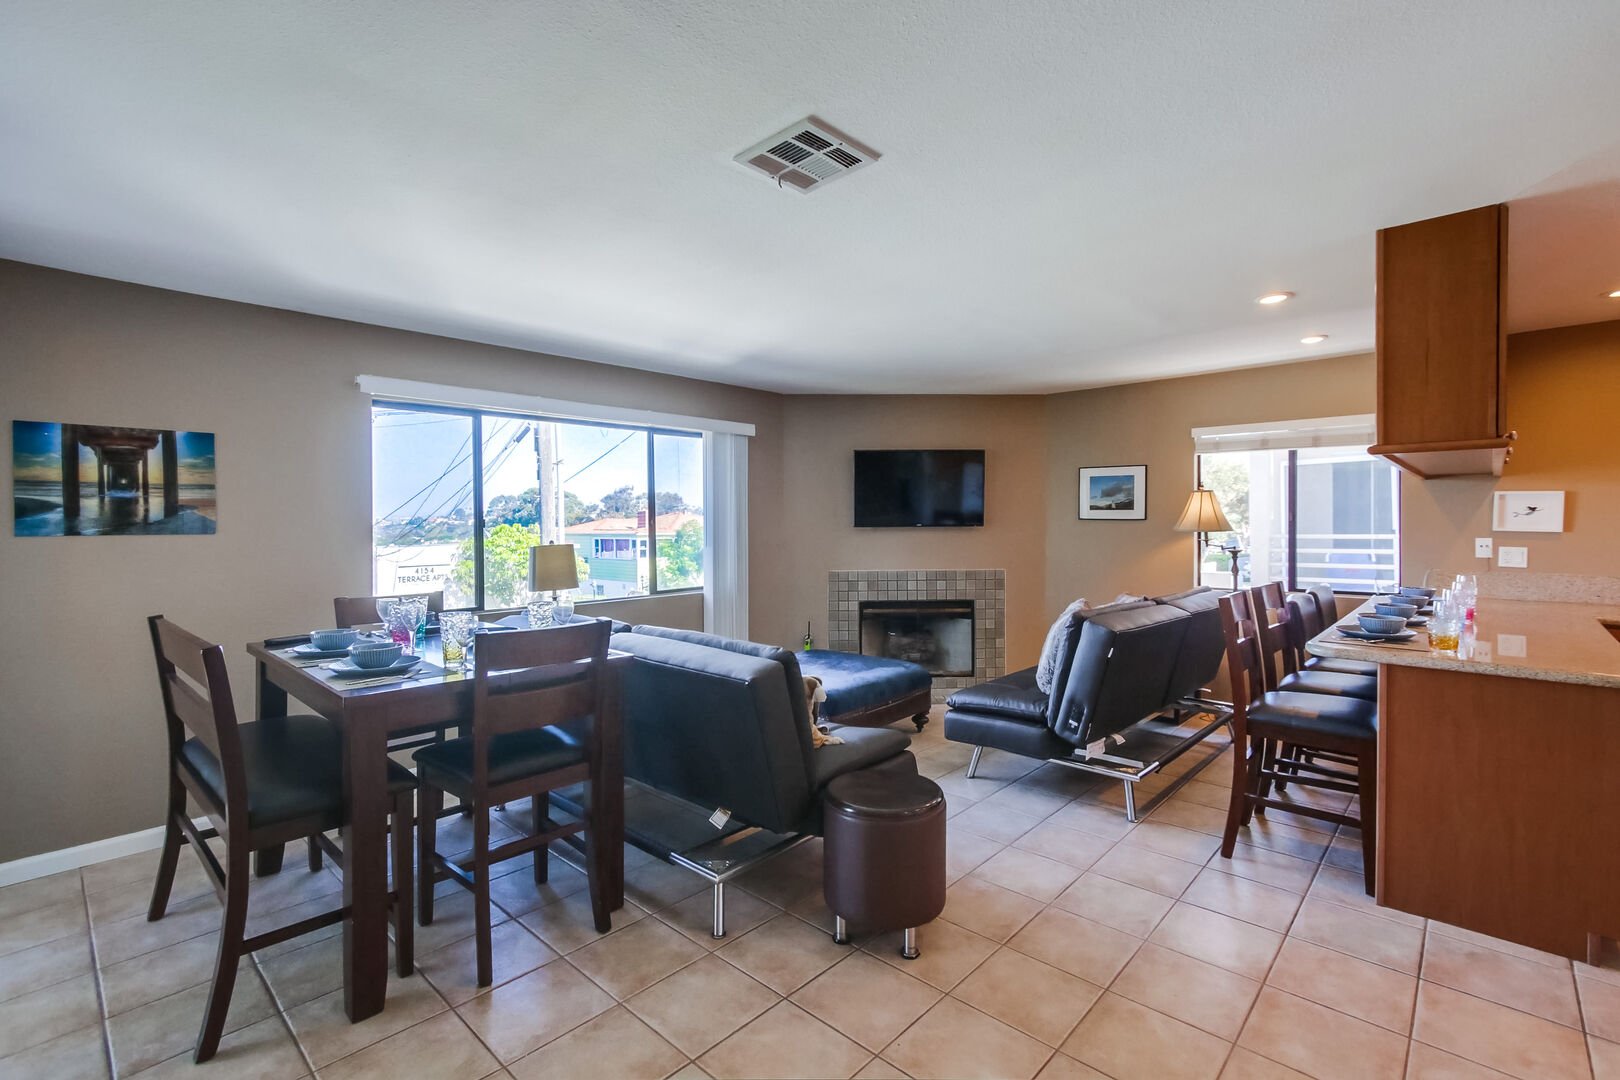 Large living space for cooking, dining, lounging and to enjoy the night sky show! Please note: firework shows at SeaWorld and around the holidays are set to a schedule. Contact us to find out when to plan to capture the display!